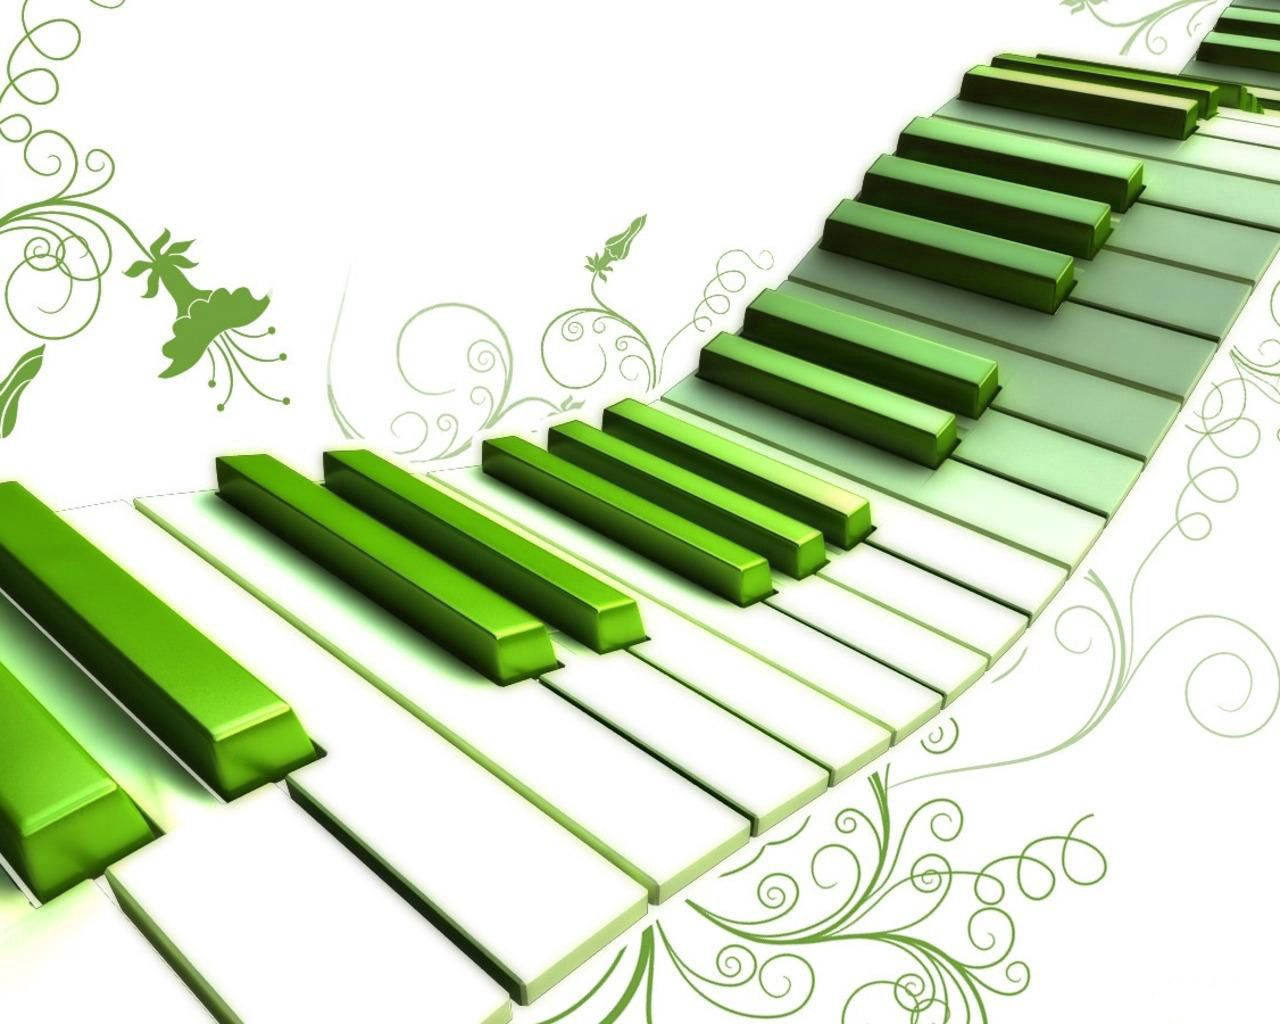 colorful piano backgrounds